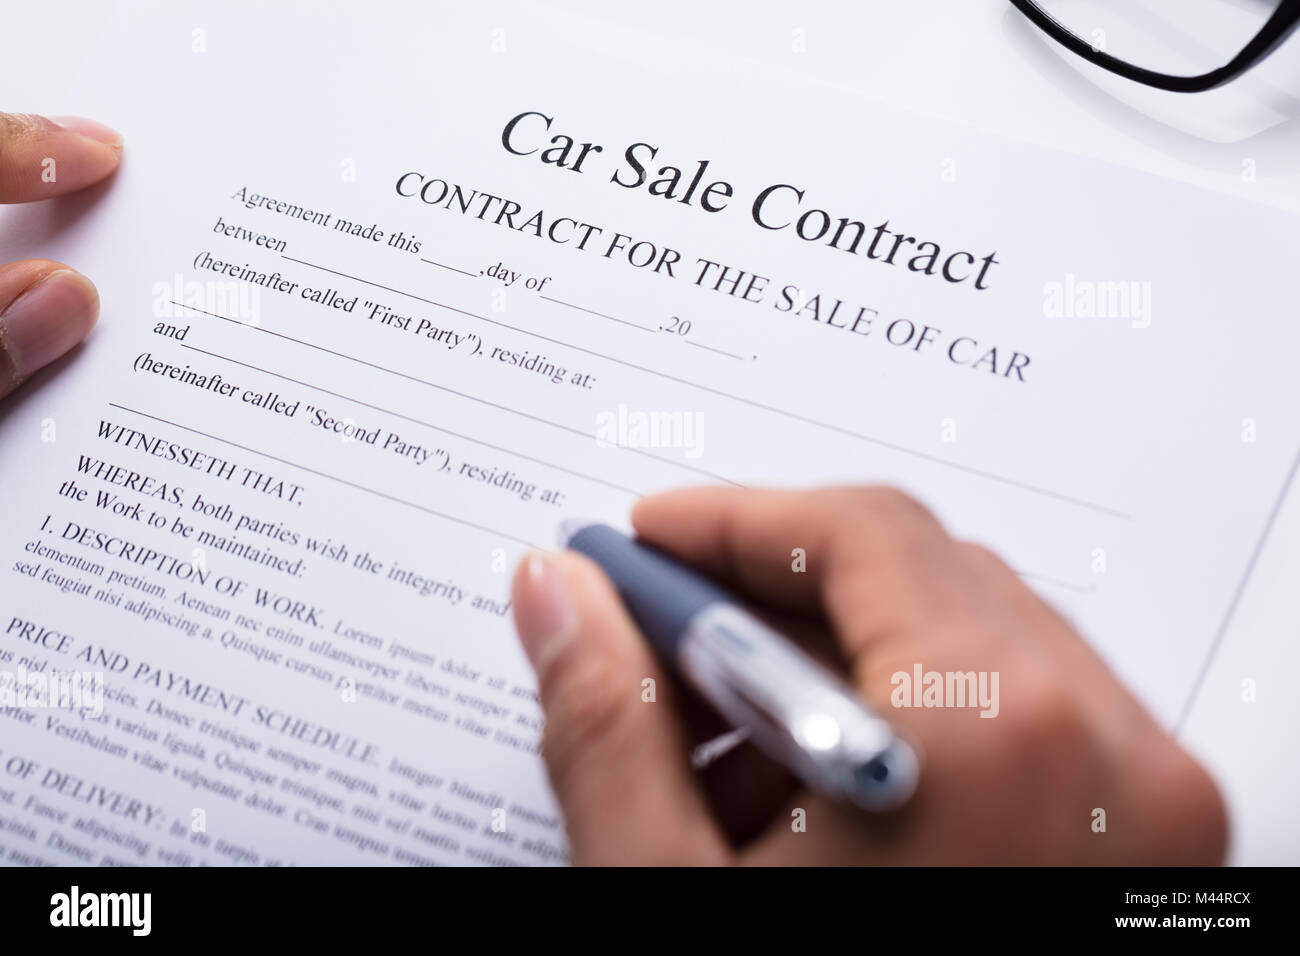 Close-up Of A Person's Hand Filling Car Sale Contract Form Stock Photo